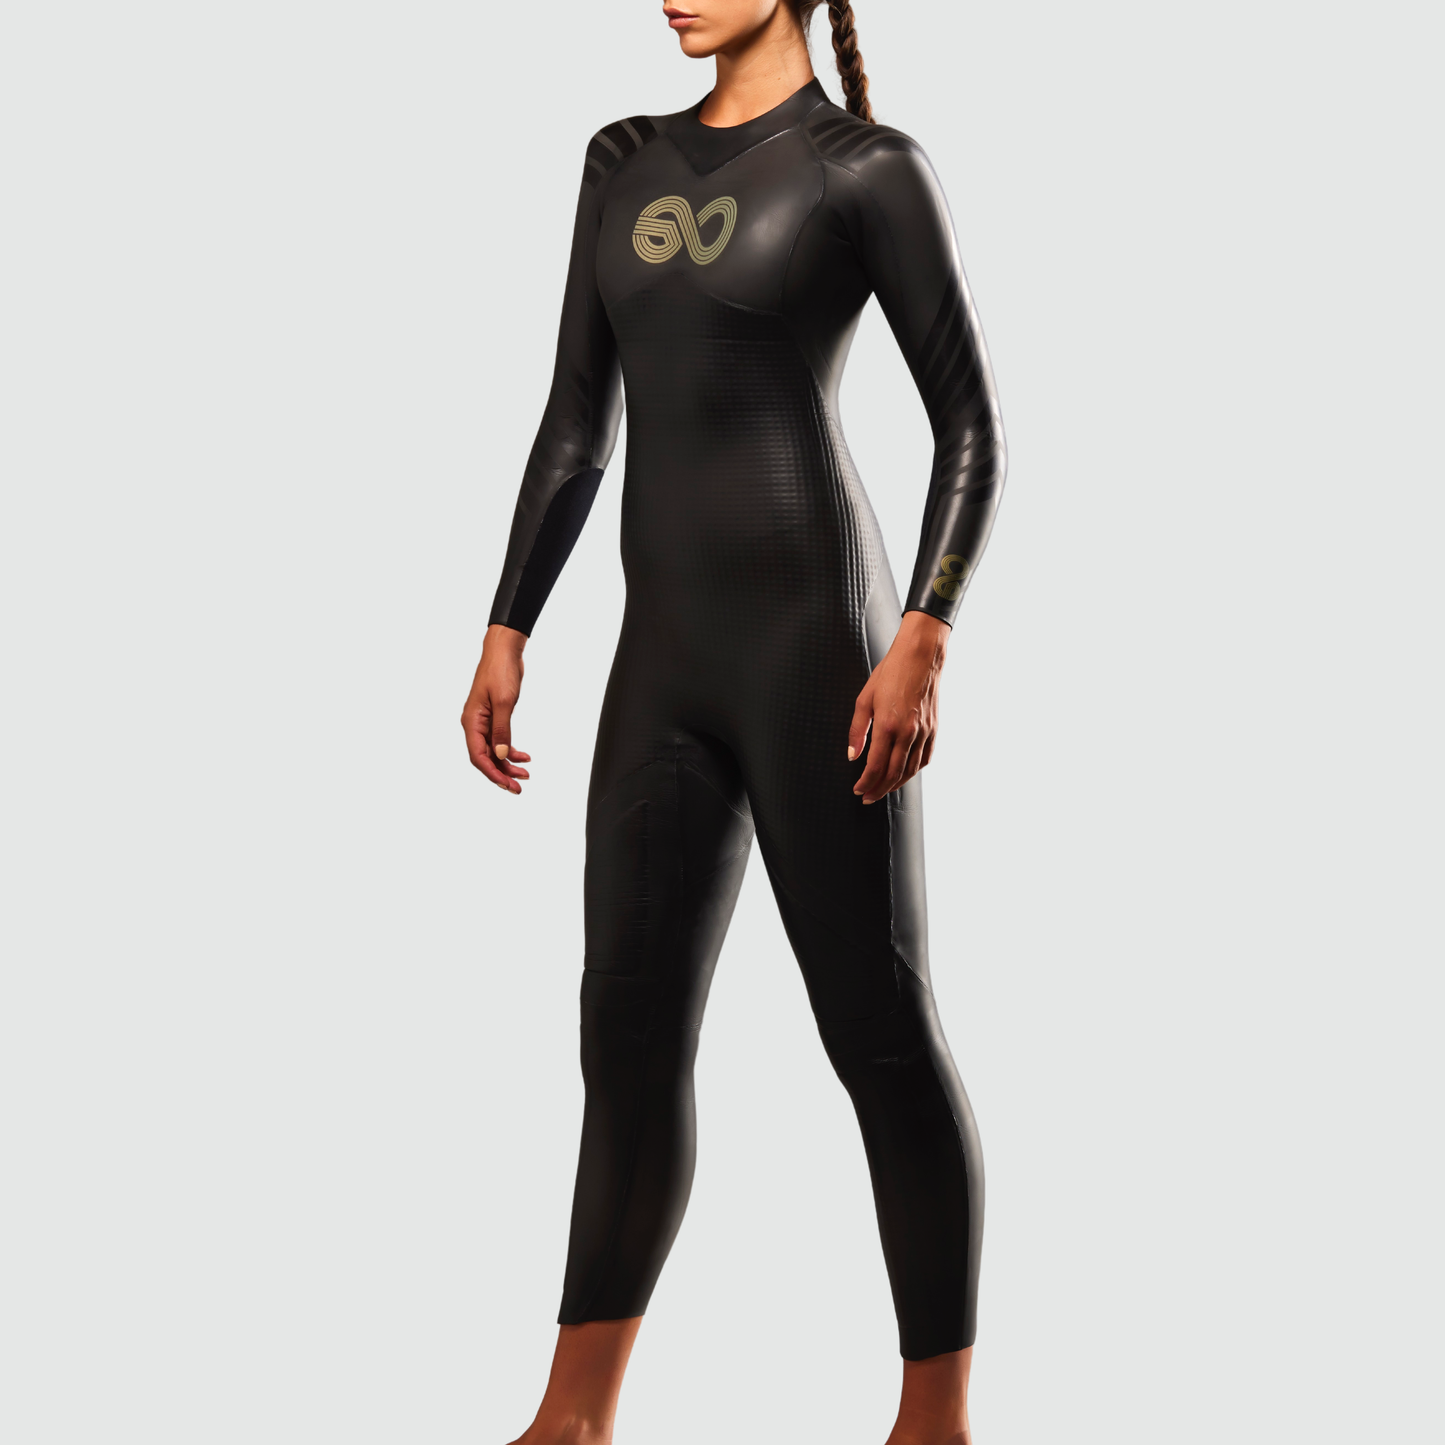 Womens Gold Wetsuit